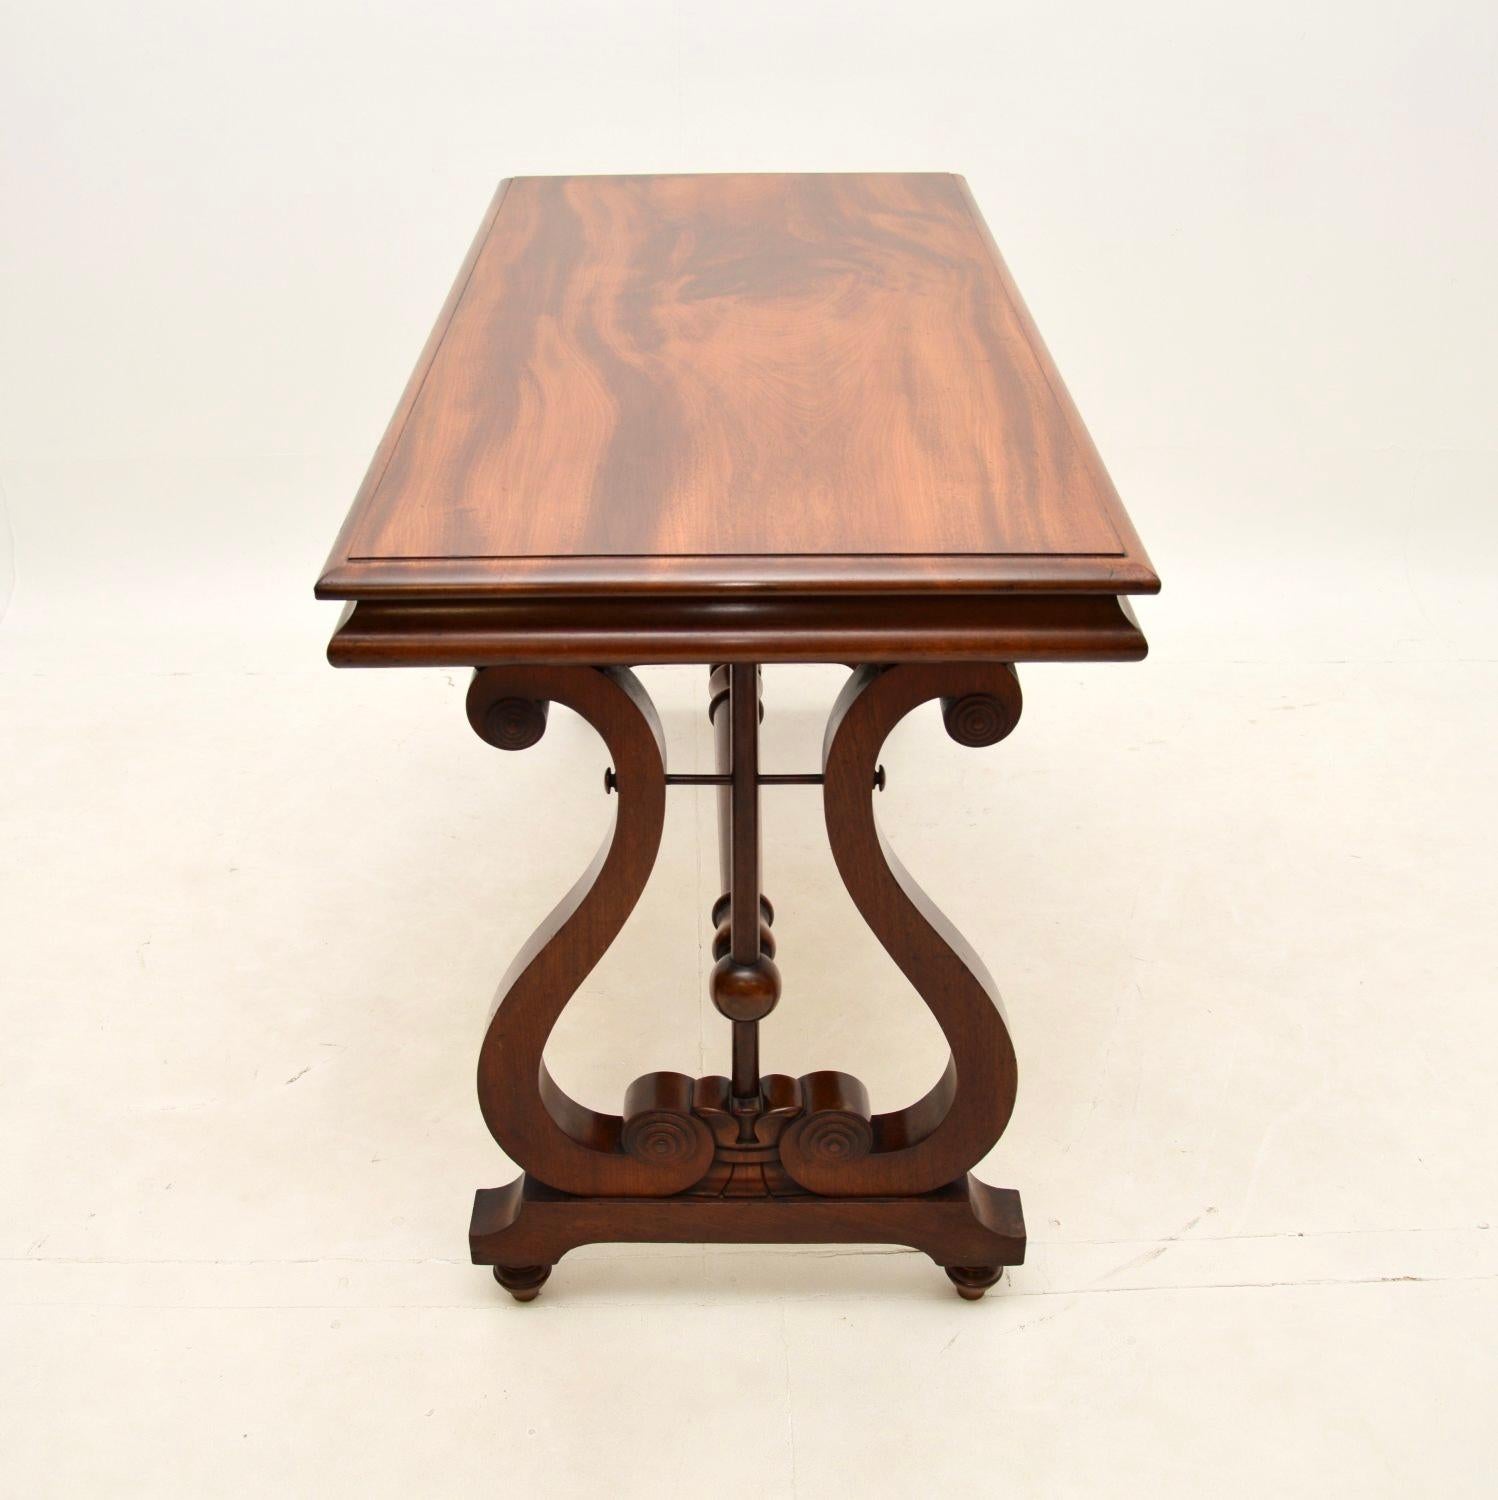 Early 19th Century Antique Regency Period Library Table / Desk